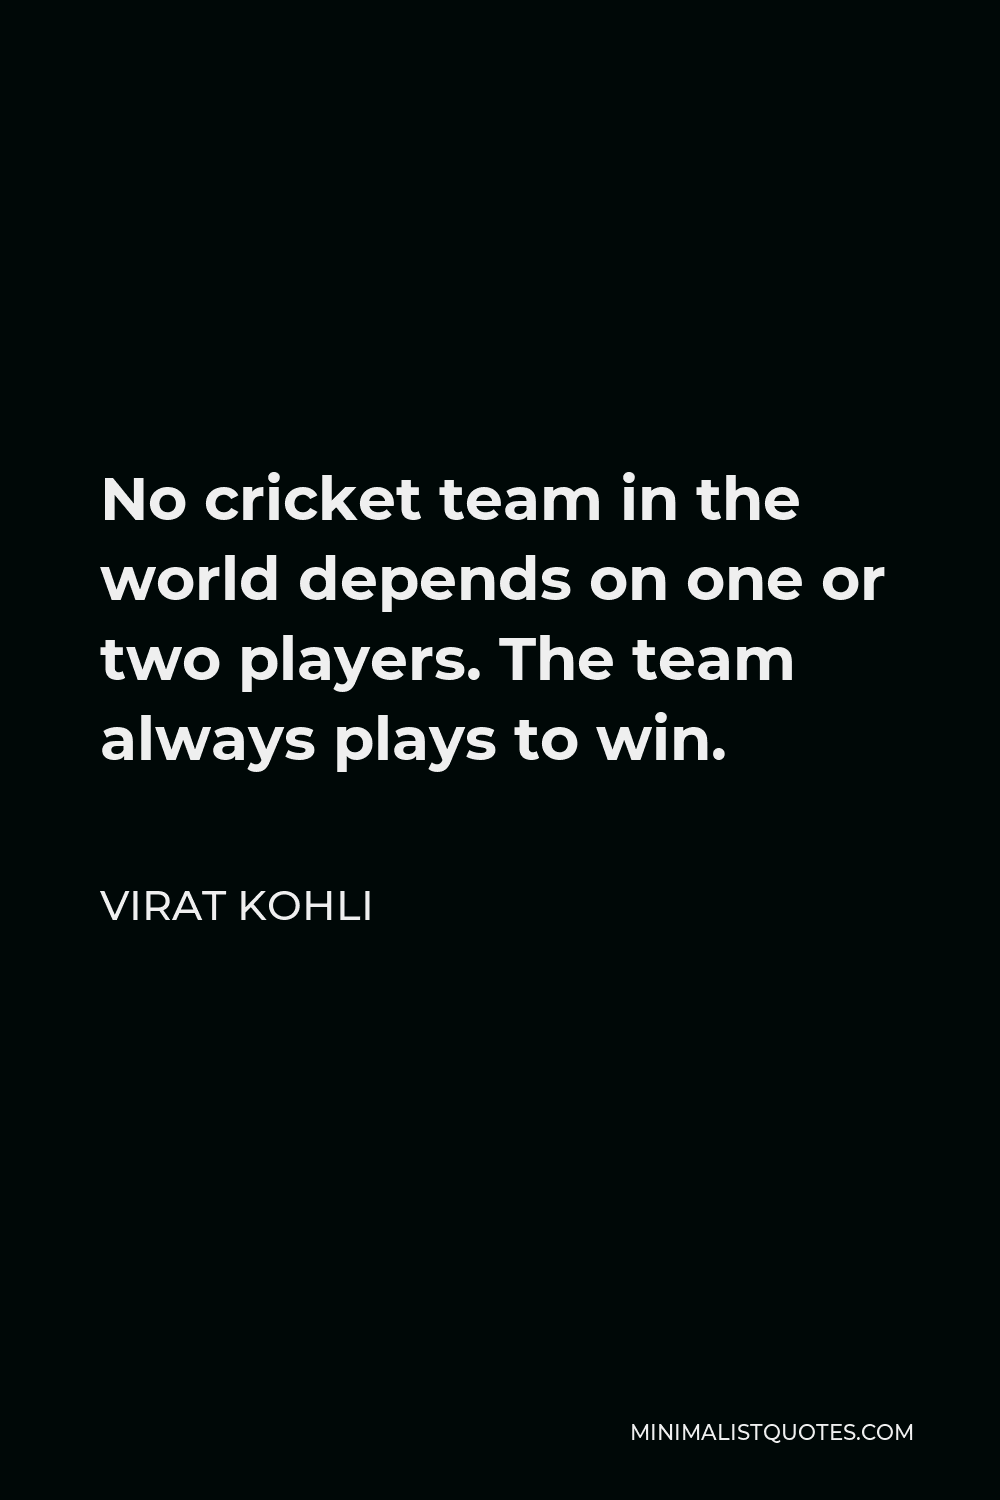 Virat Kohli Quote - No cricket team in the world depends on one or two players. The team always plays to win.